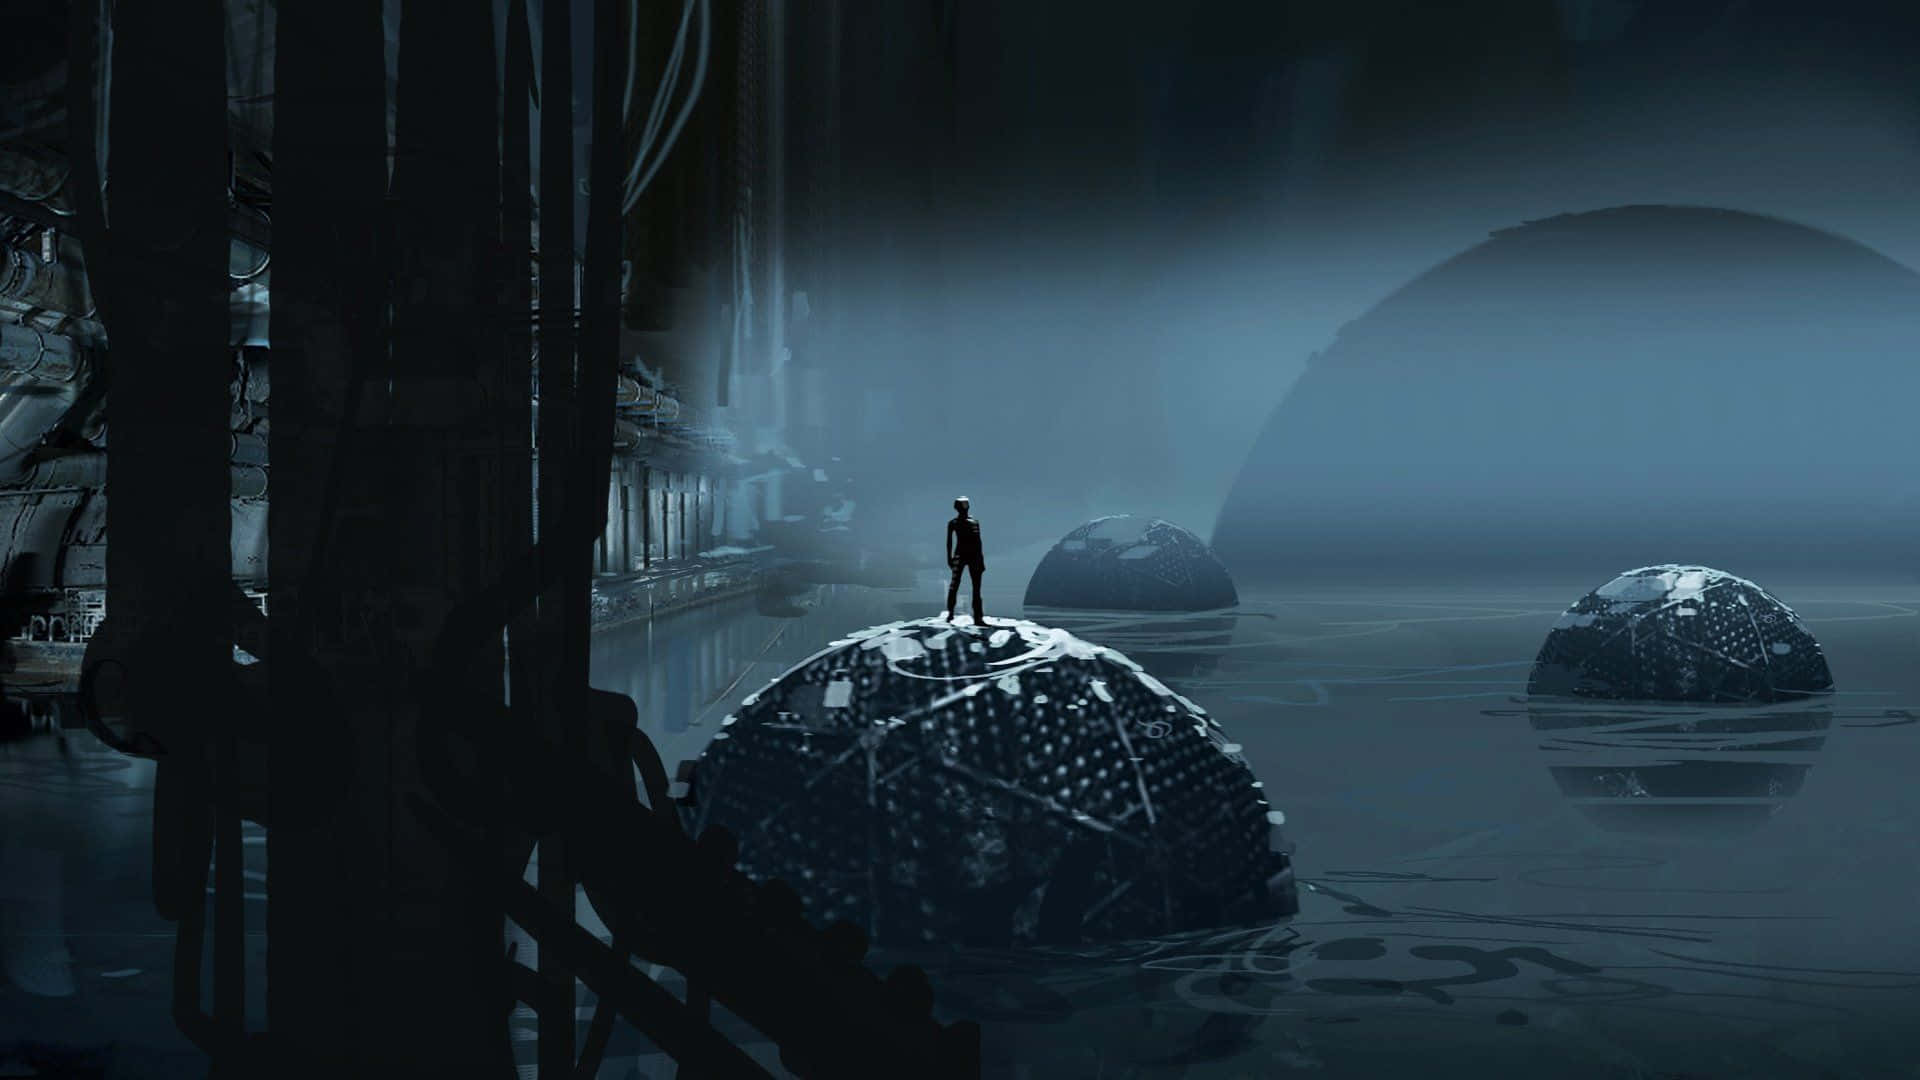 A Man Standing In A Dark Water With A Large Sphere